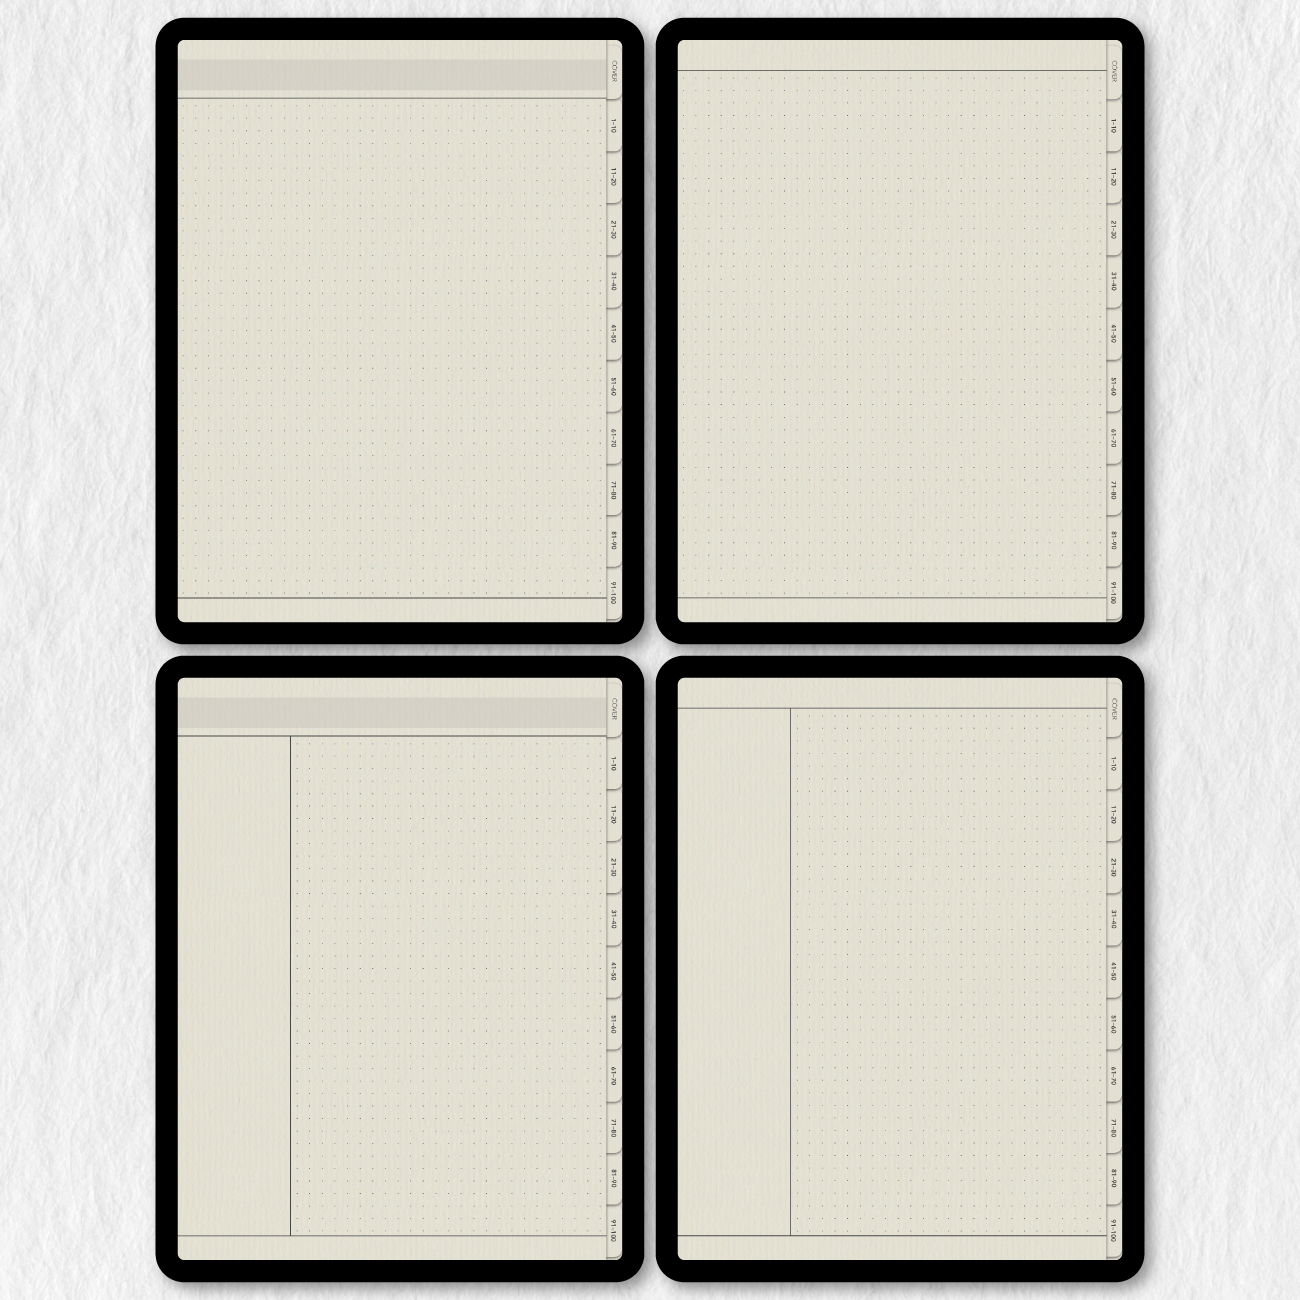 Beige Paper Digital Notebook For Goodnotes Notability